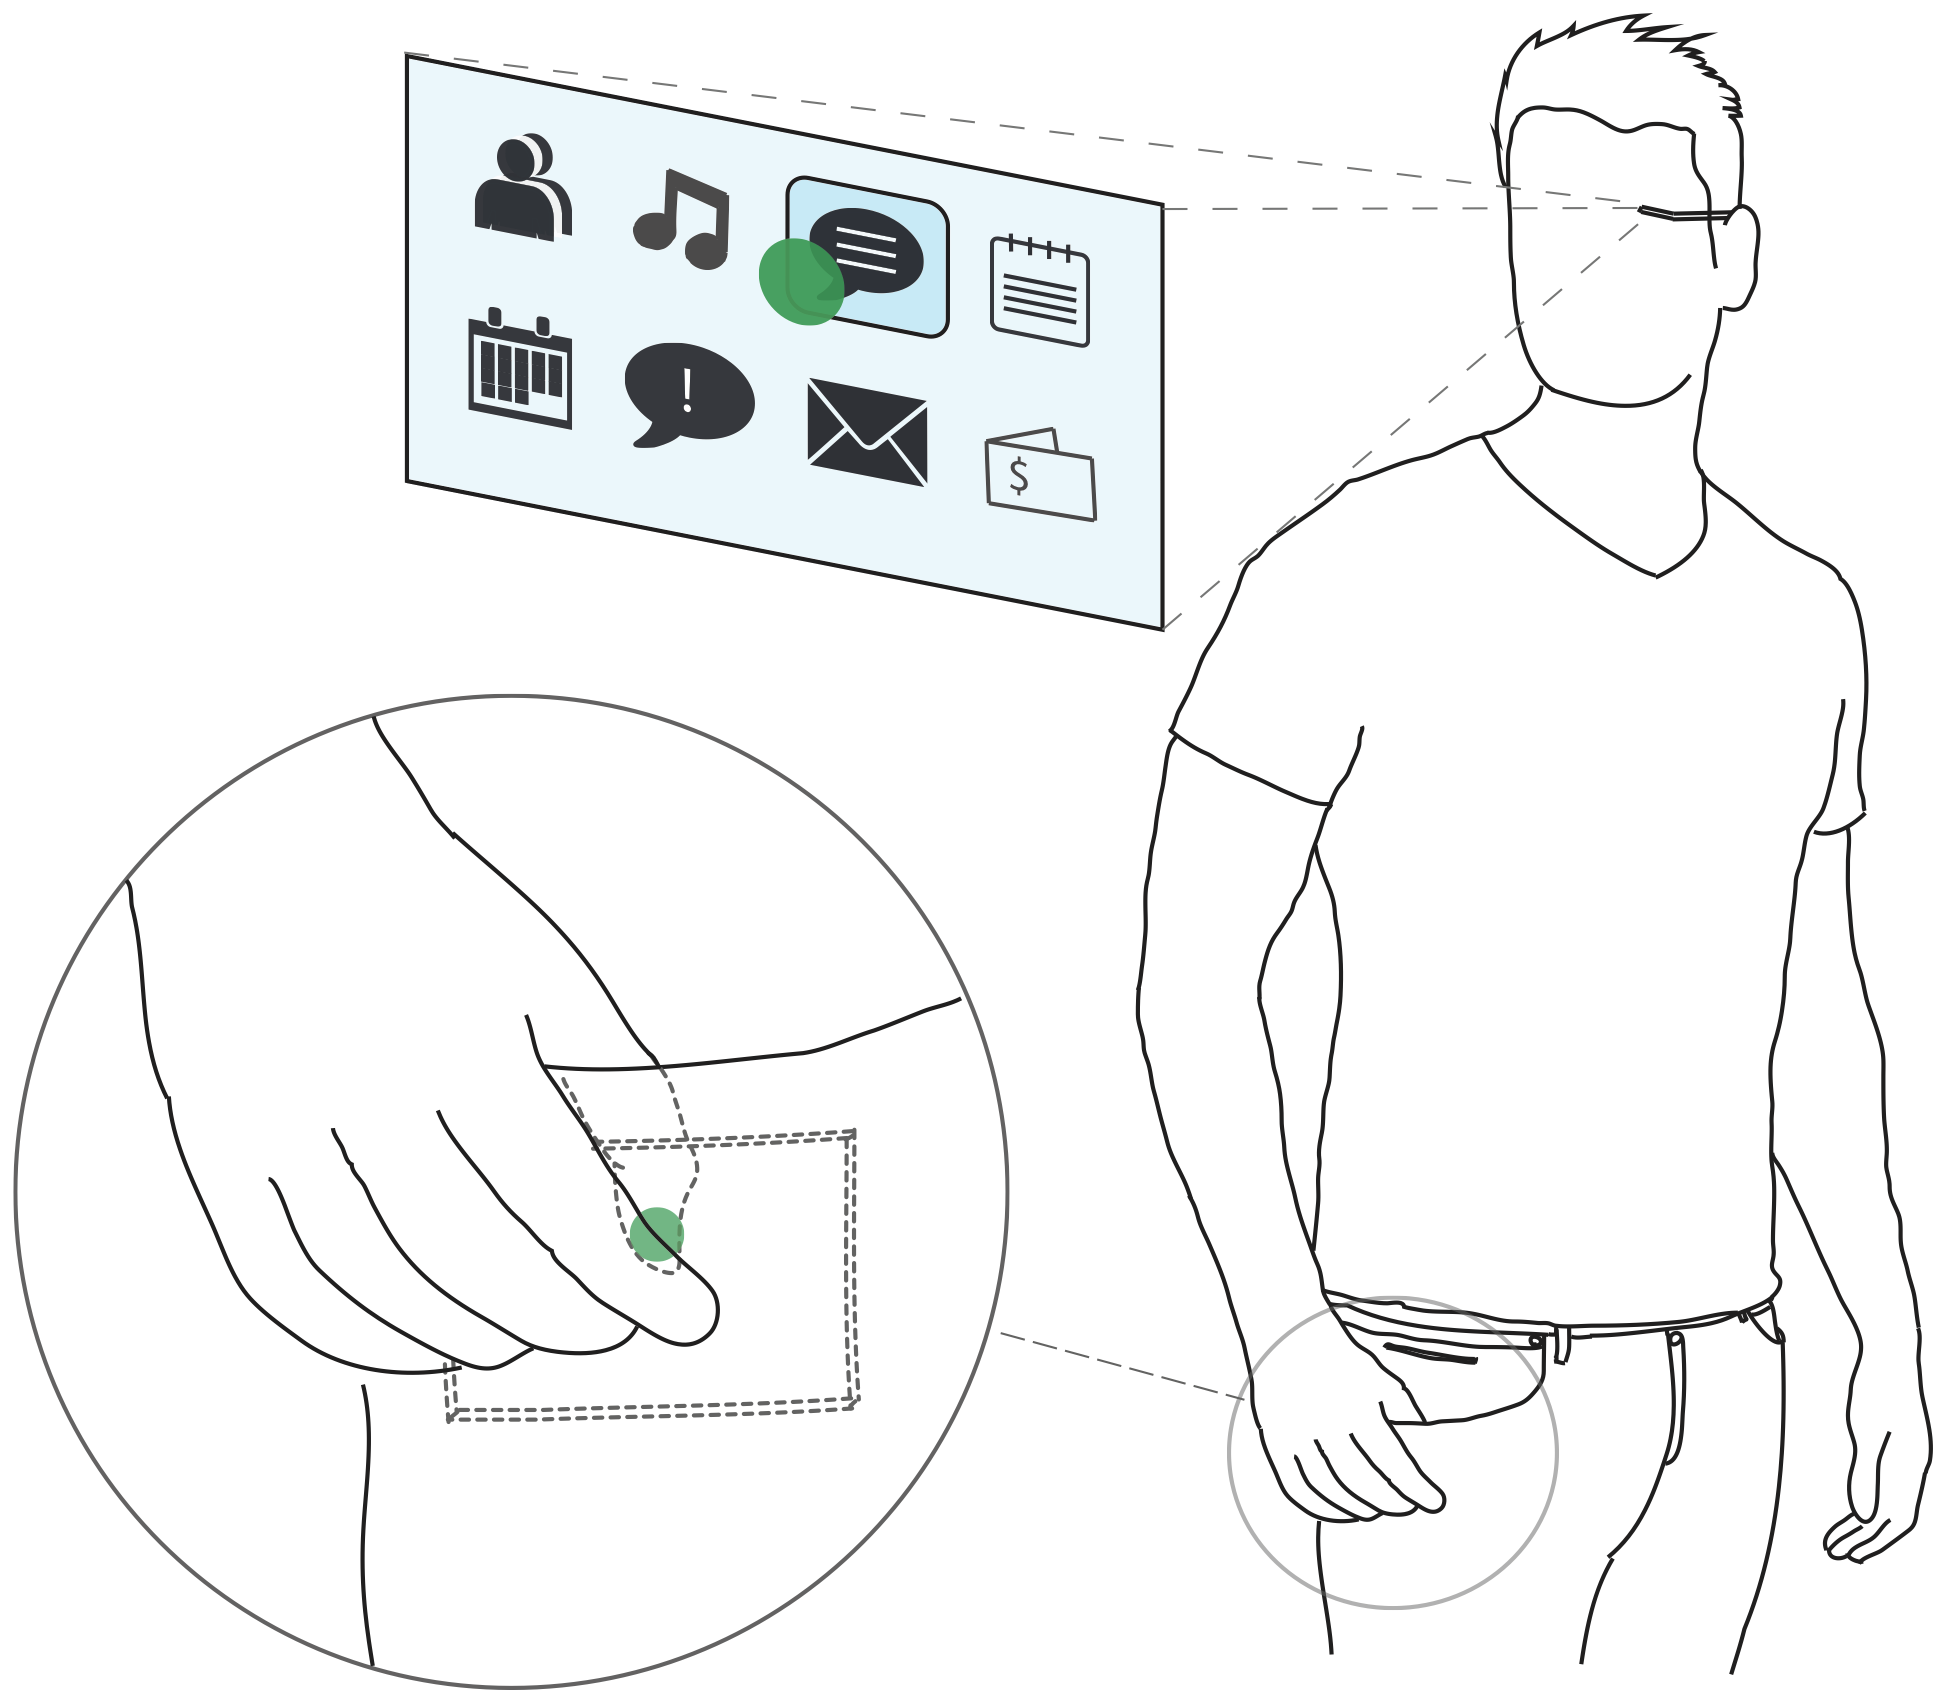 PocketThumb: a Wearable Dual-Sided Touch Interface